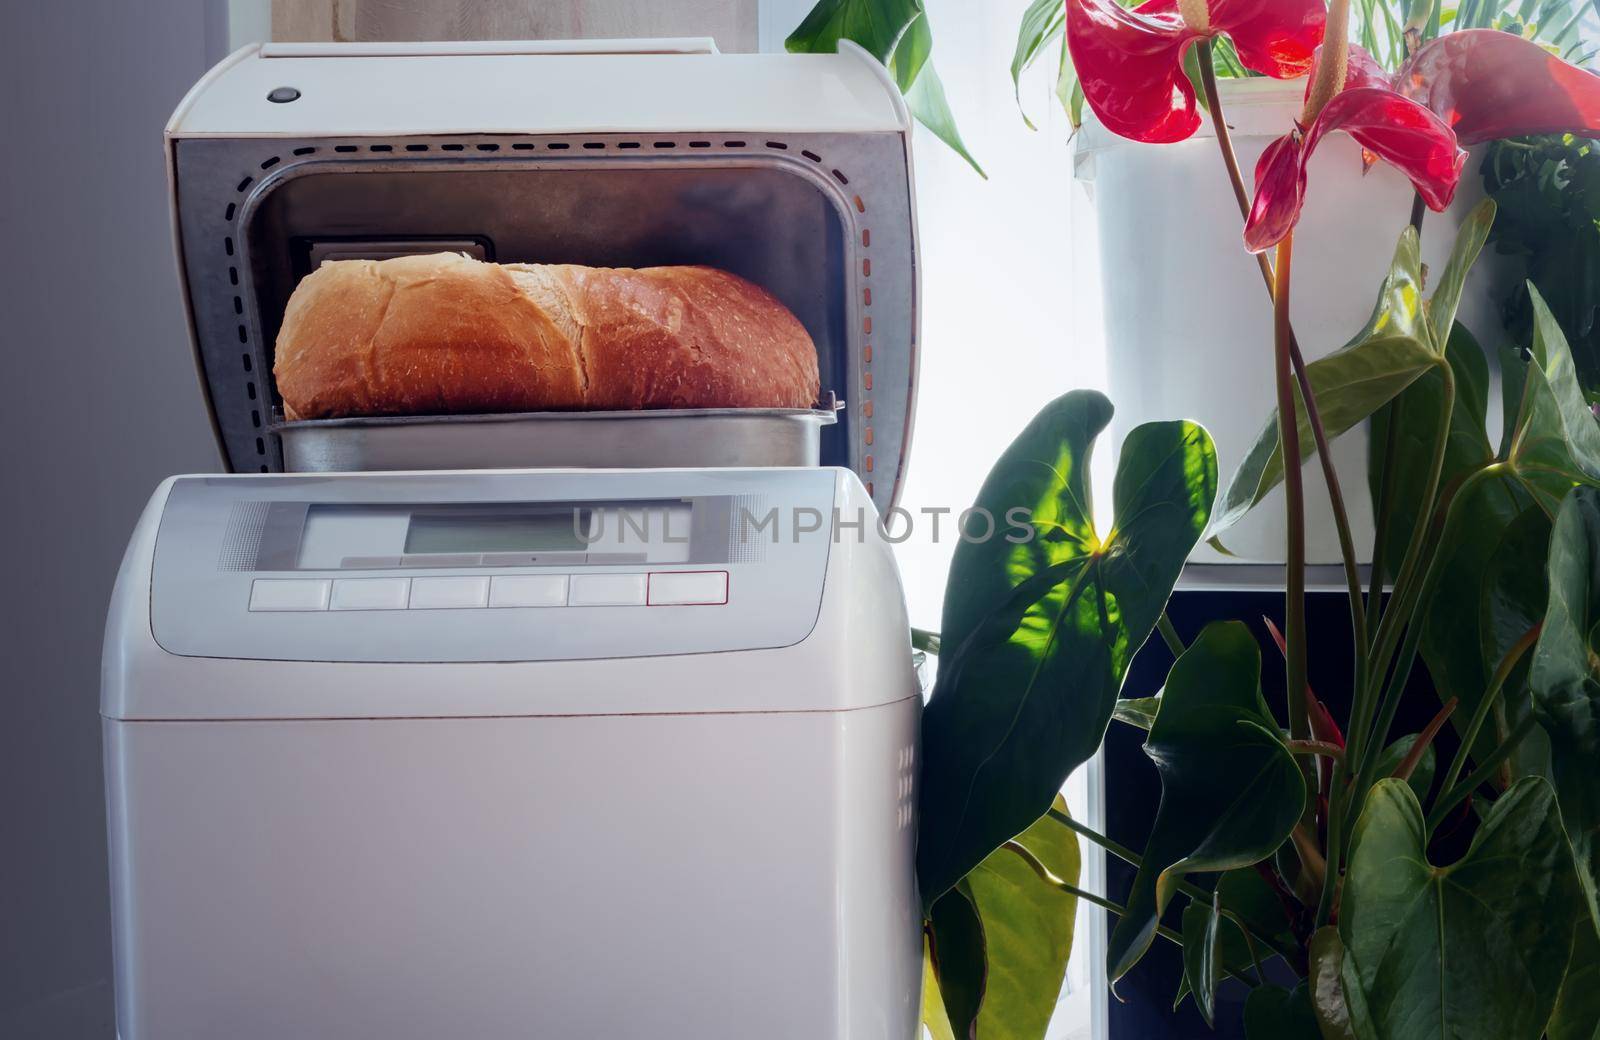 Household appliances: electric oven for baking bread at home. The white bread baked in it.